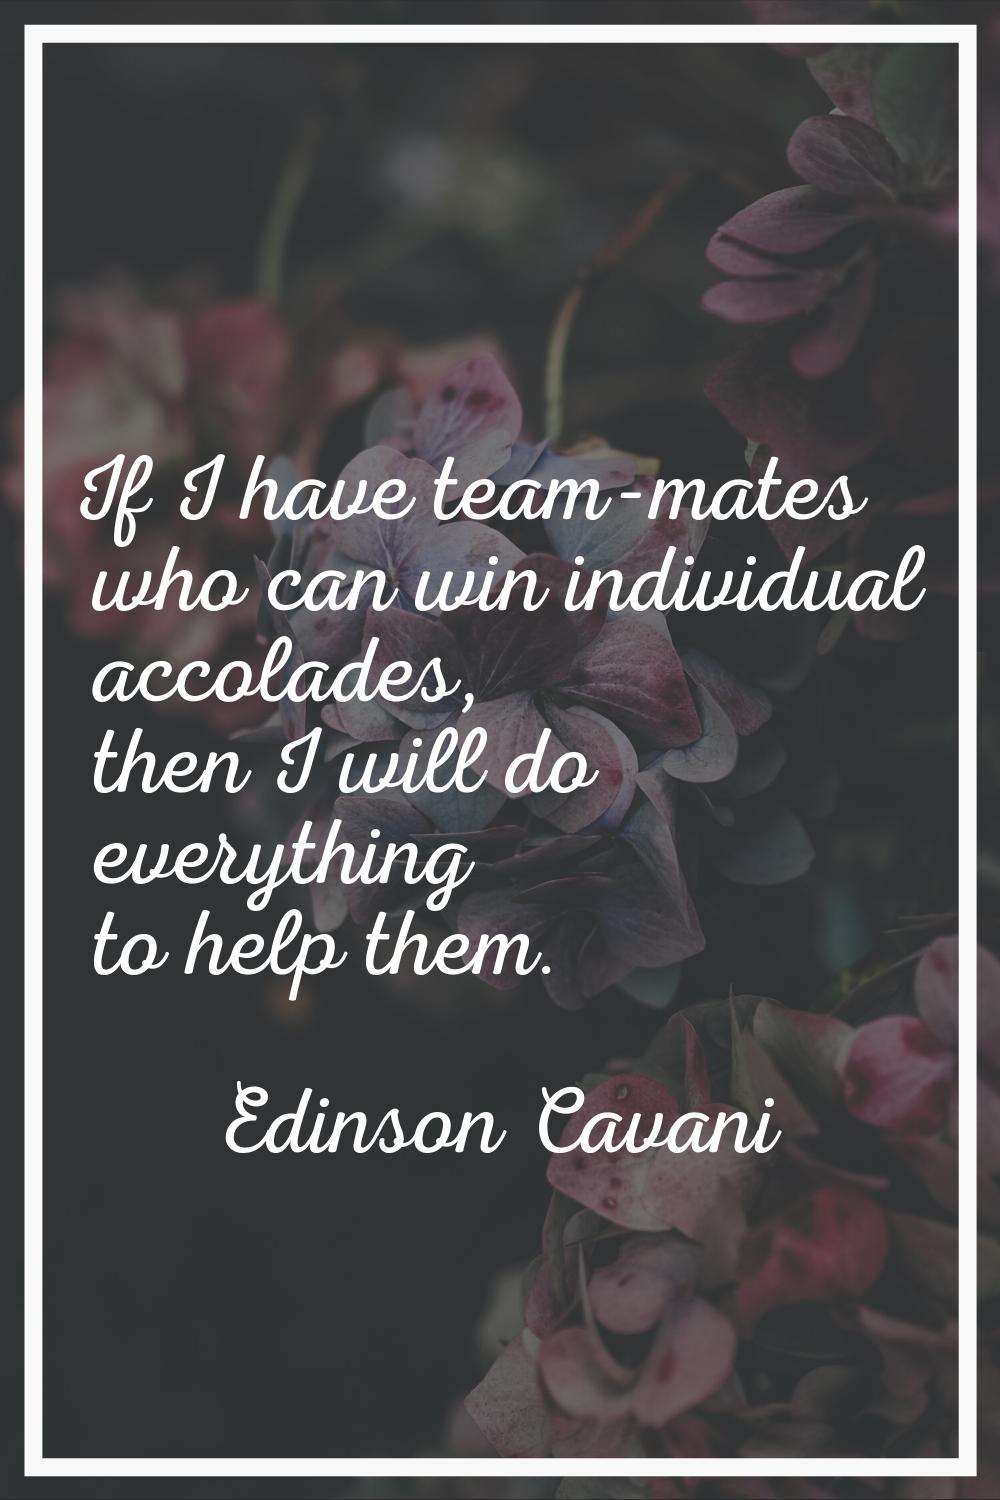 If I have team-mates who can win individual accolades, then I will do everything to help them.